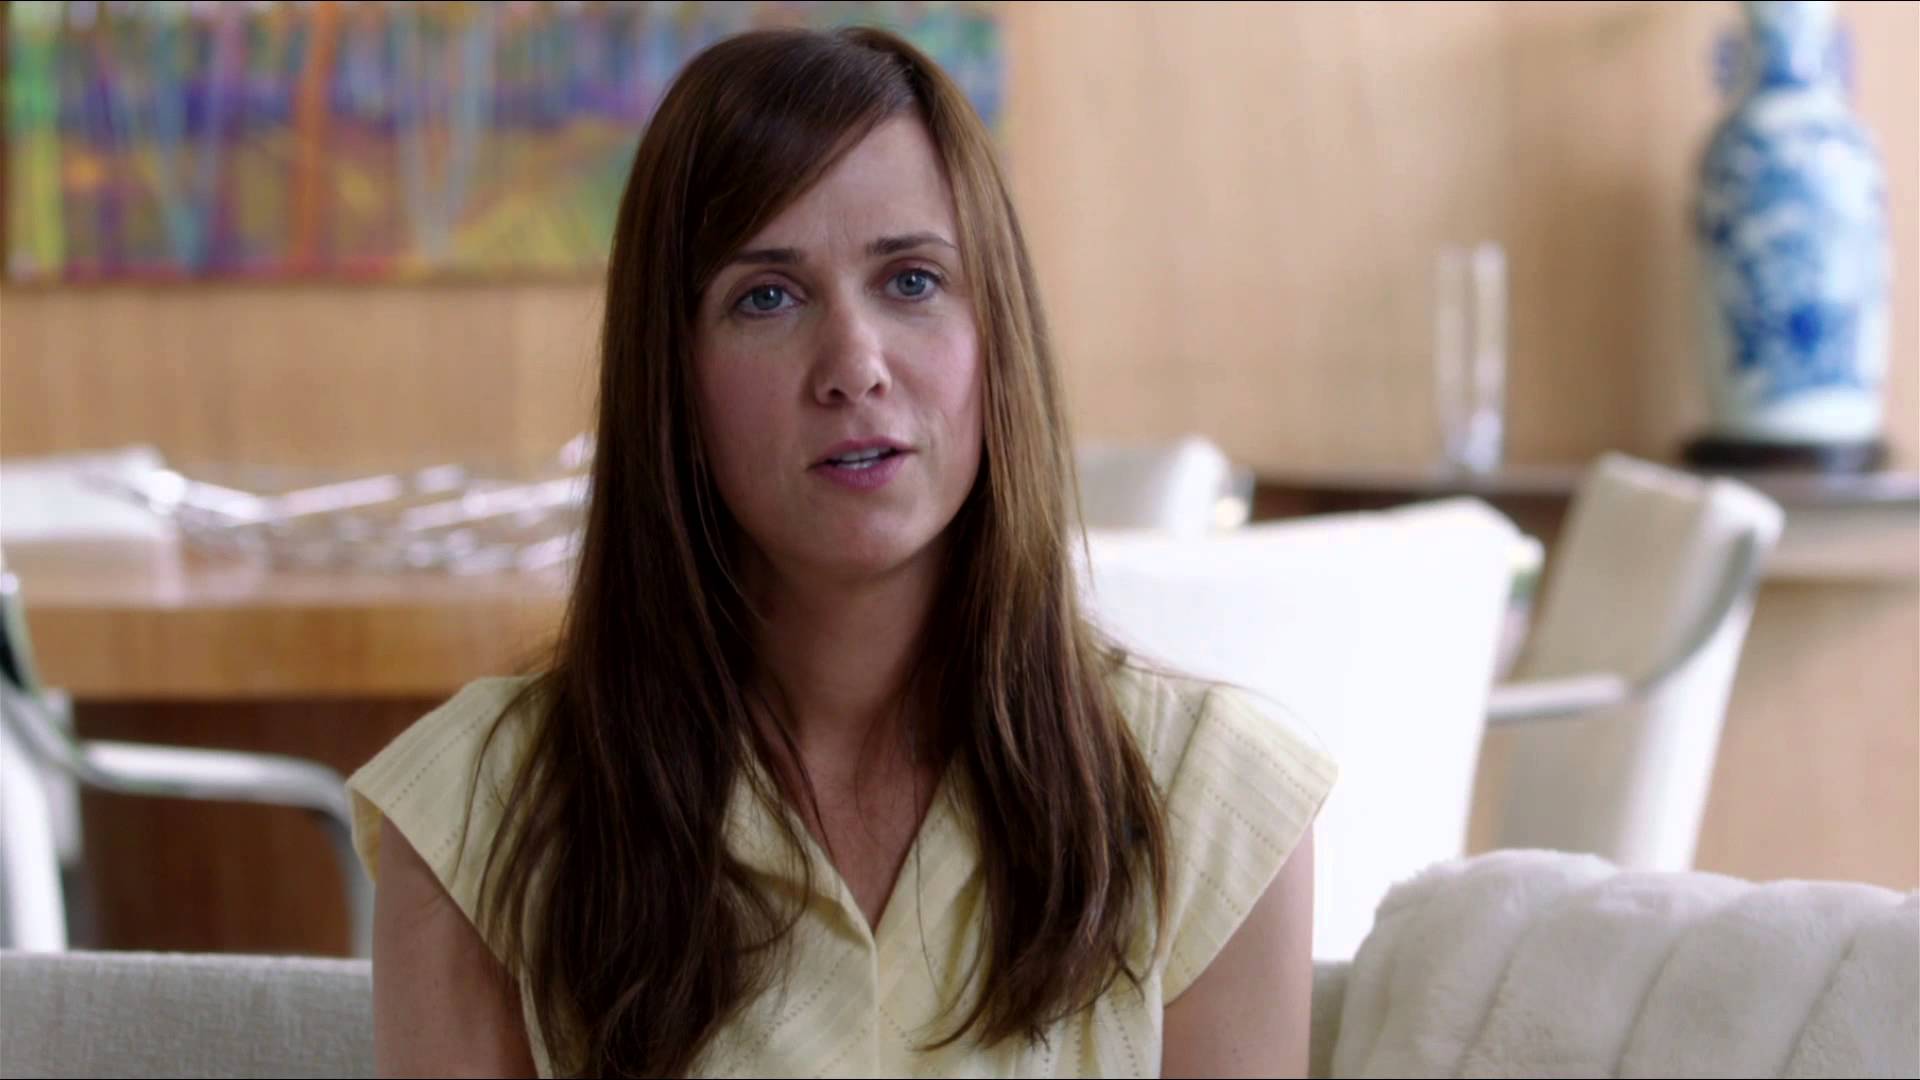 Kristen Wiig Is Fearless in Unpredictable “Welcome to Me”